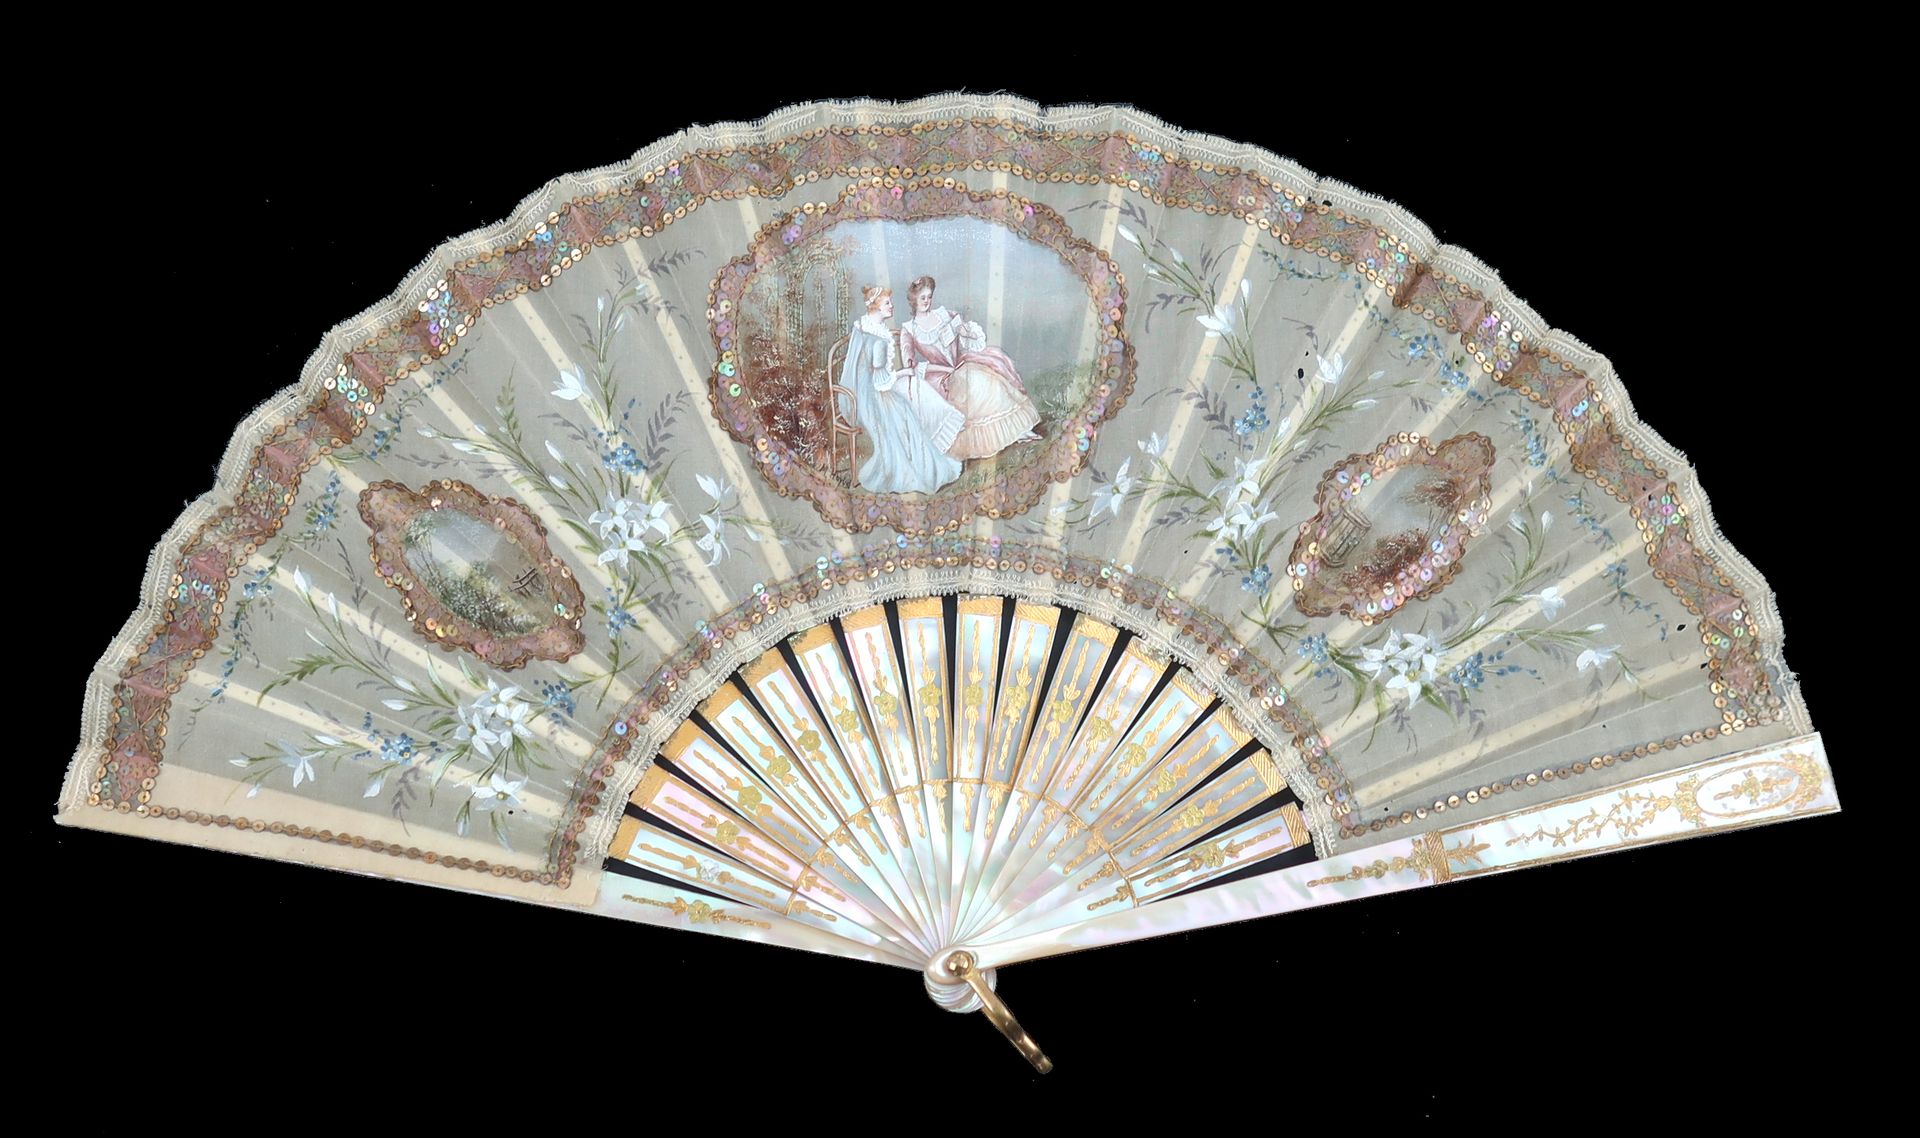 Null A very decorative fan c 1900 – 1910, the shiny pale pink Mother of Pearl gi&hellip;